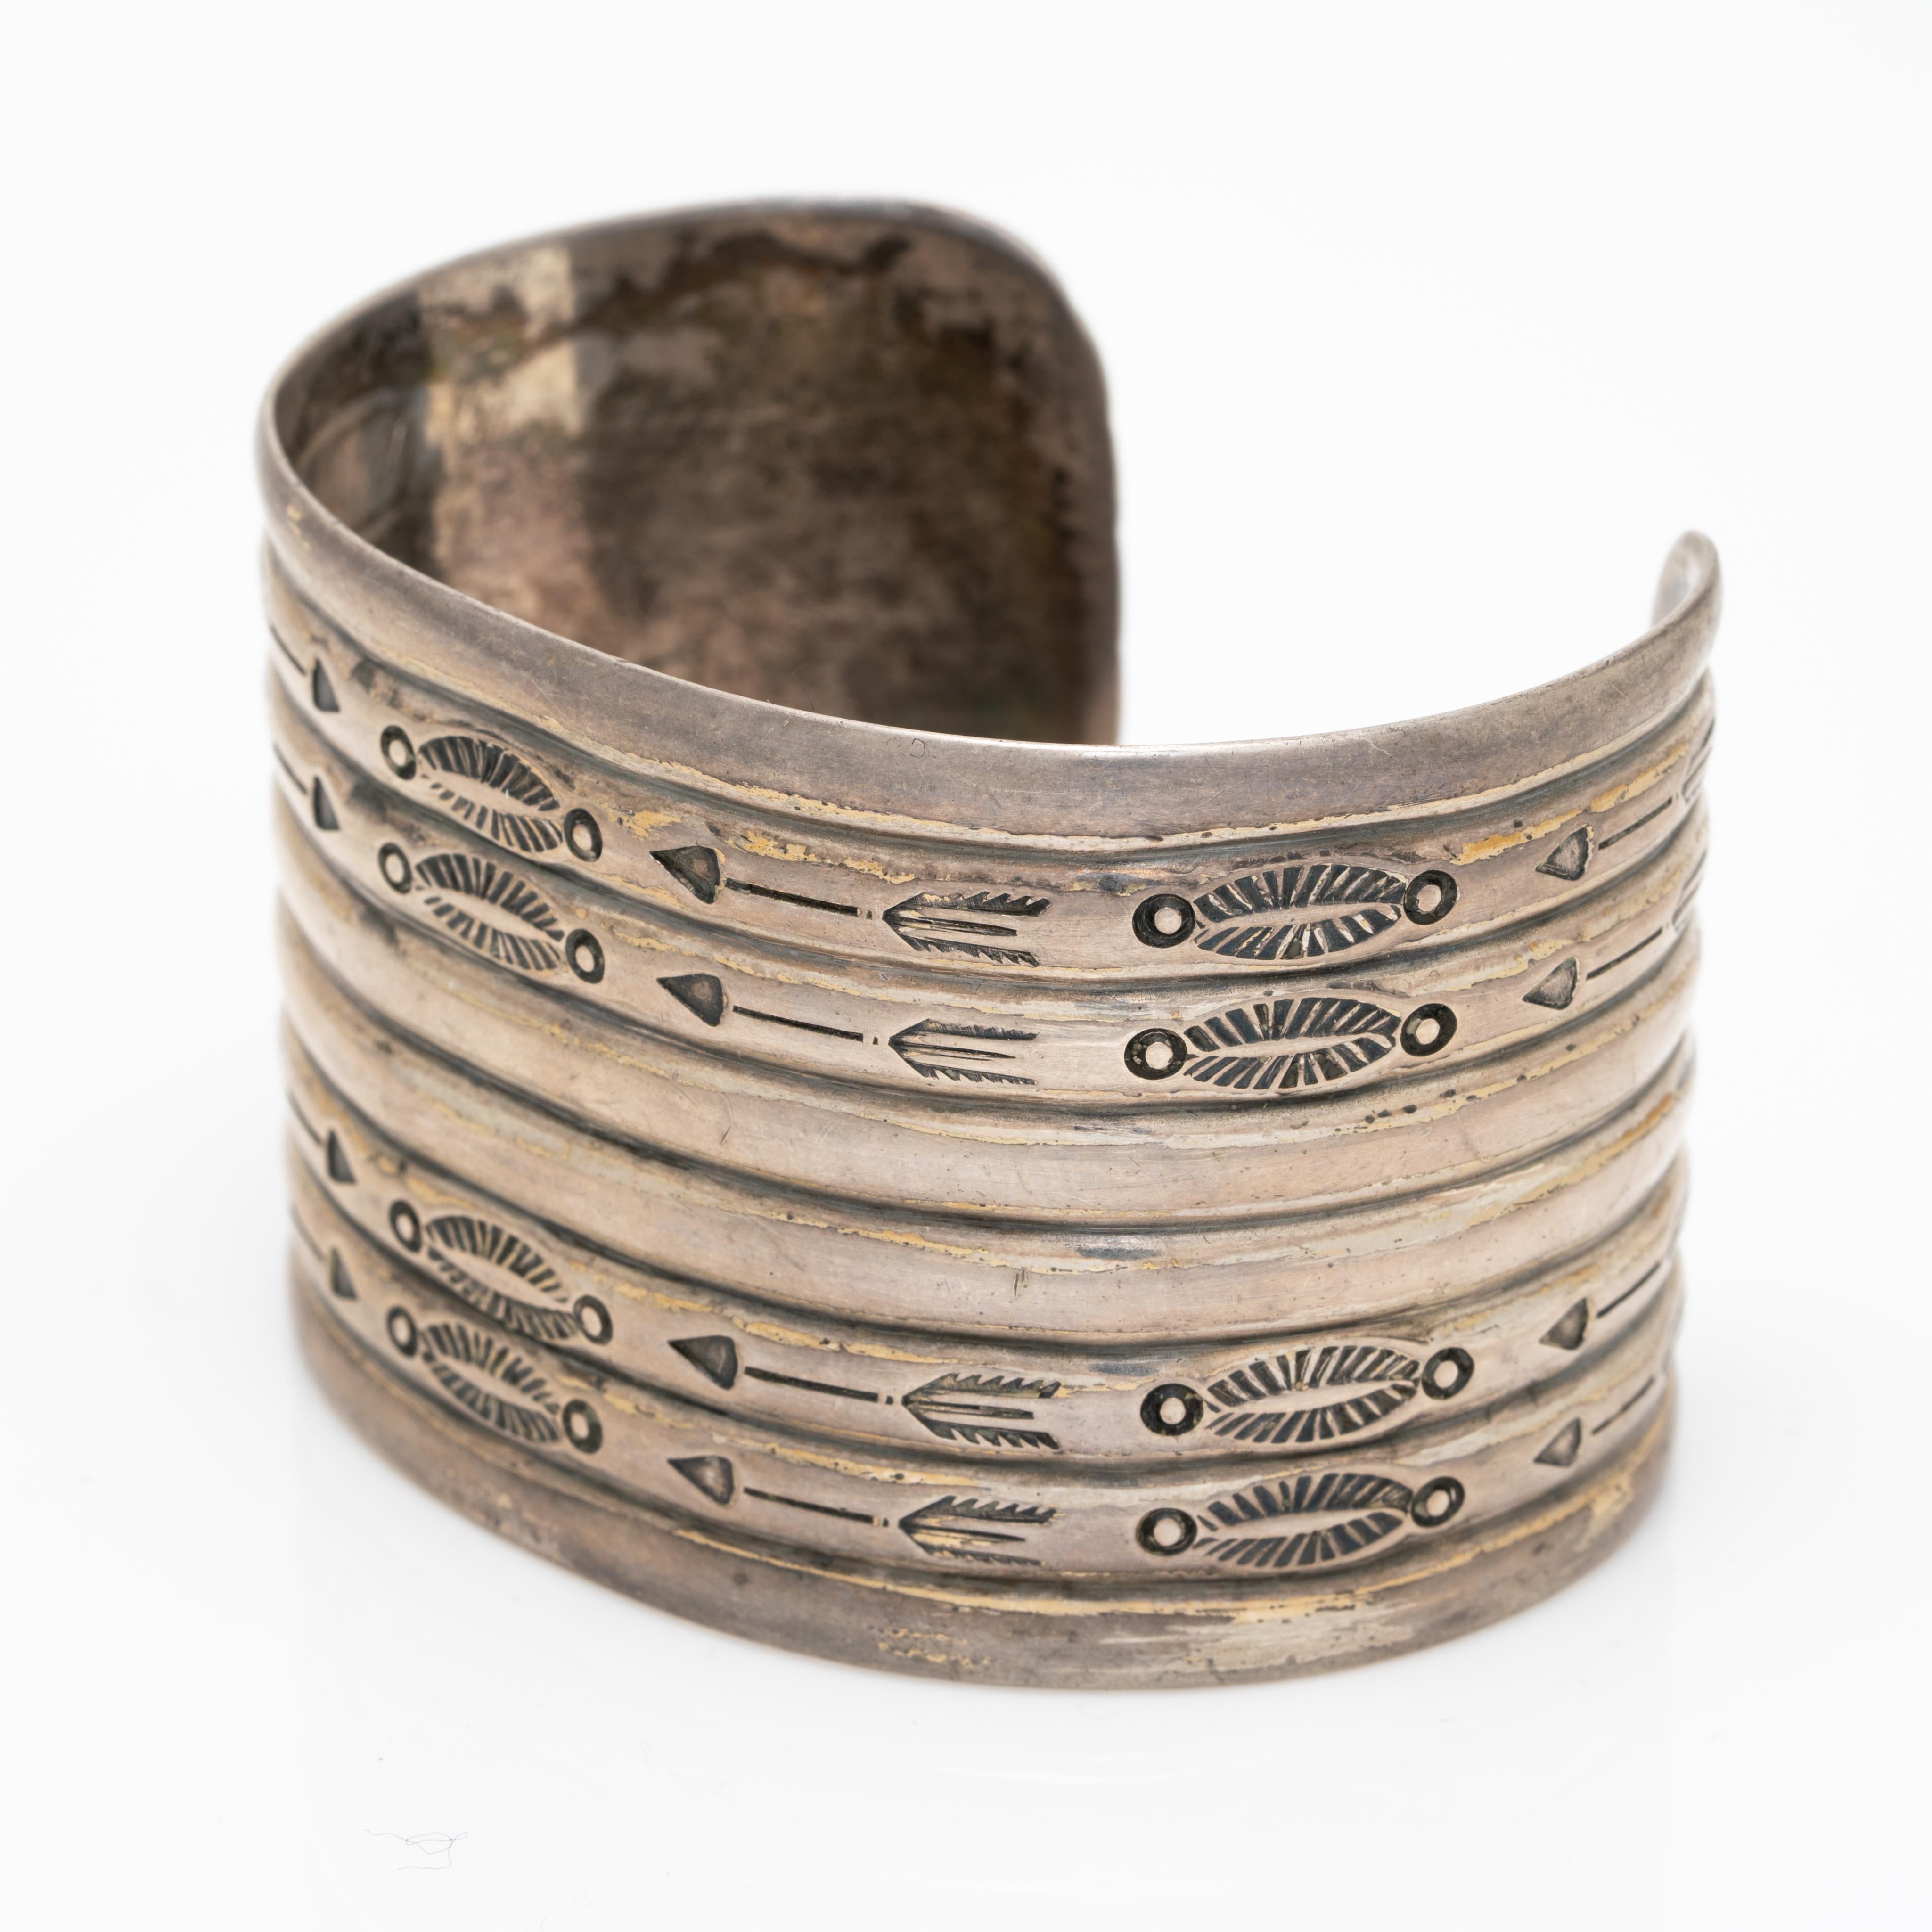 Vintage Native American Navajo Sterling Double Row Hand Engraved Arrows Bracelet Cuff c.1950s

Hand engraved and hand forged. A wonderful vintage Navajo cuff!

The patina of the silver is oxidized, we do not clean vintage and antique silver pieces